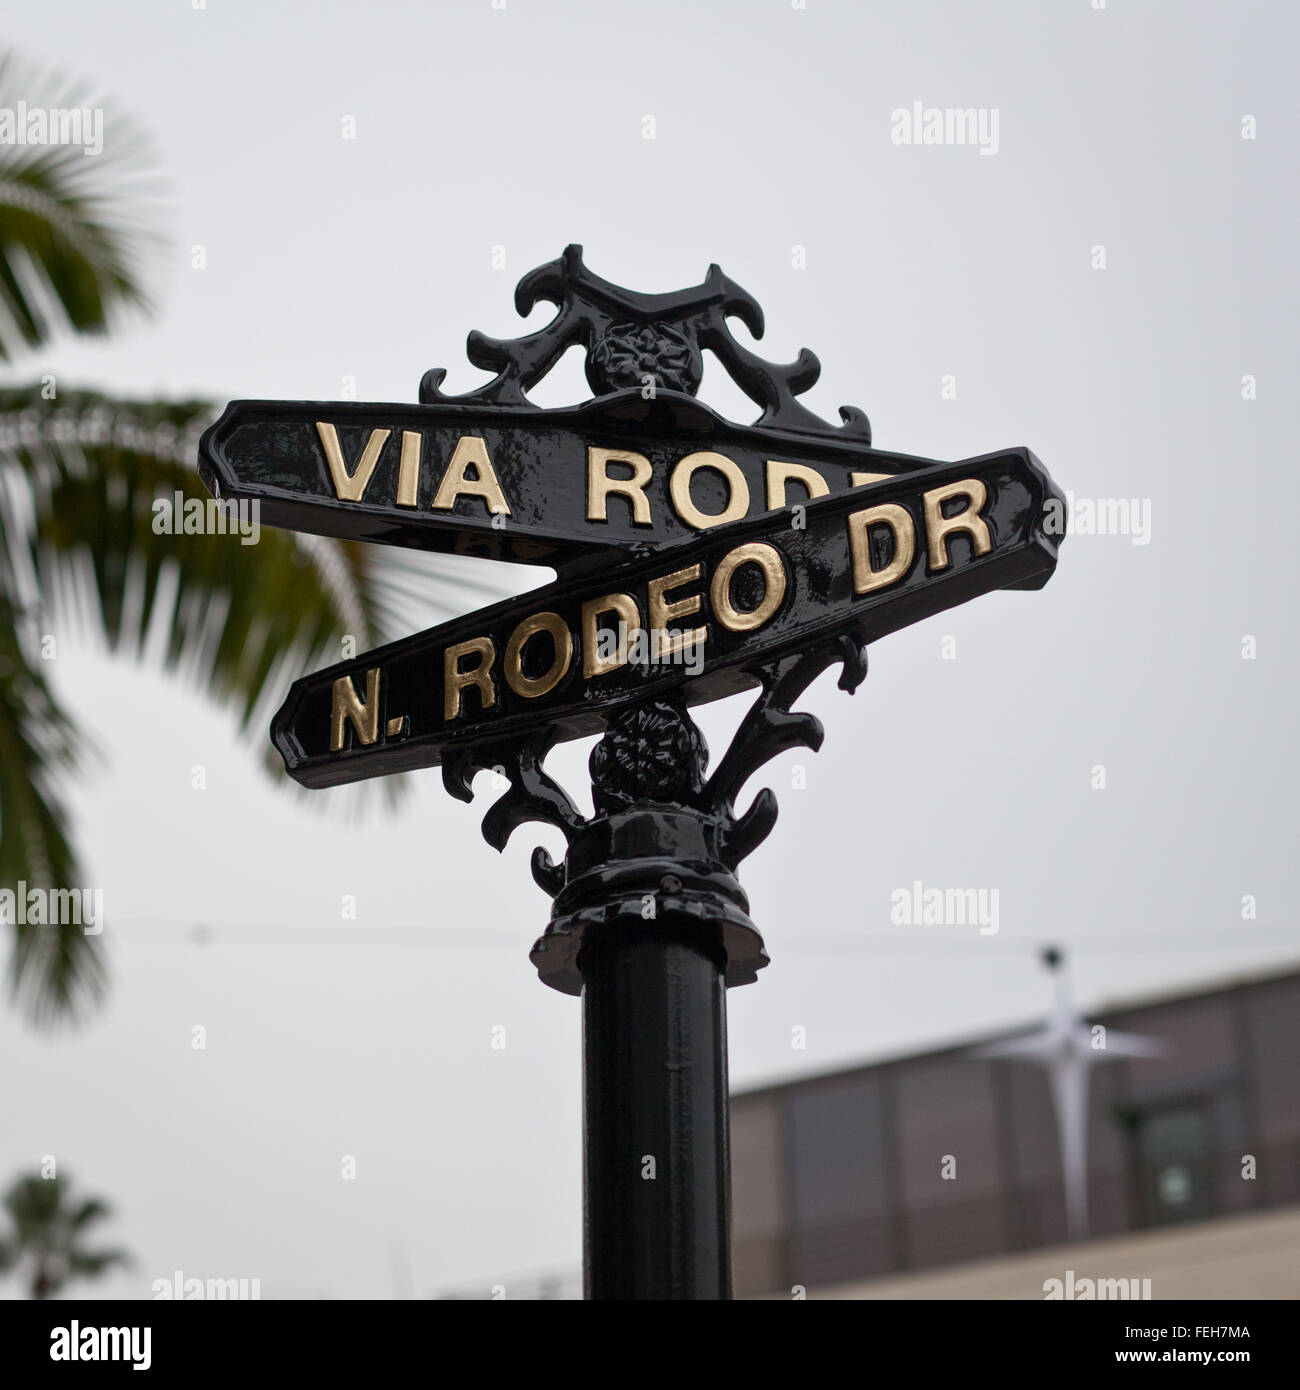 Rodeo drive sign hi-res stock photography and images - Alamy